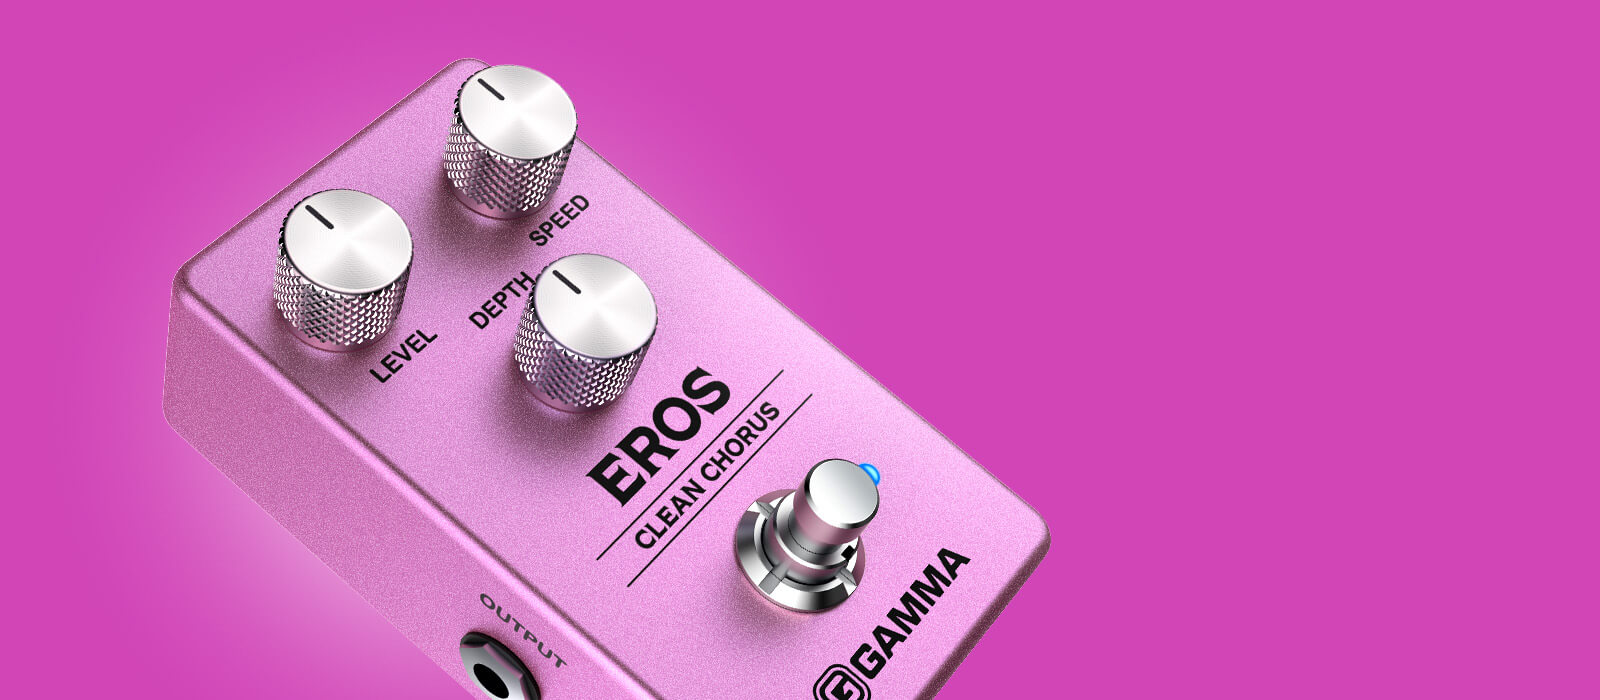 Gamma Eros clean chorus pedal floating on pink background.